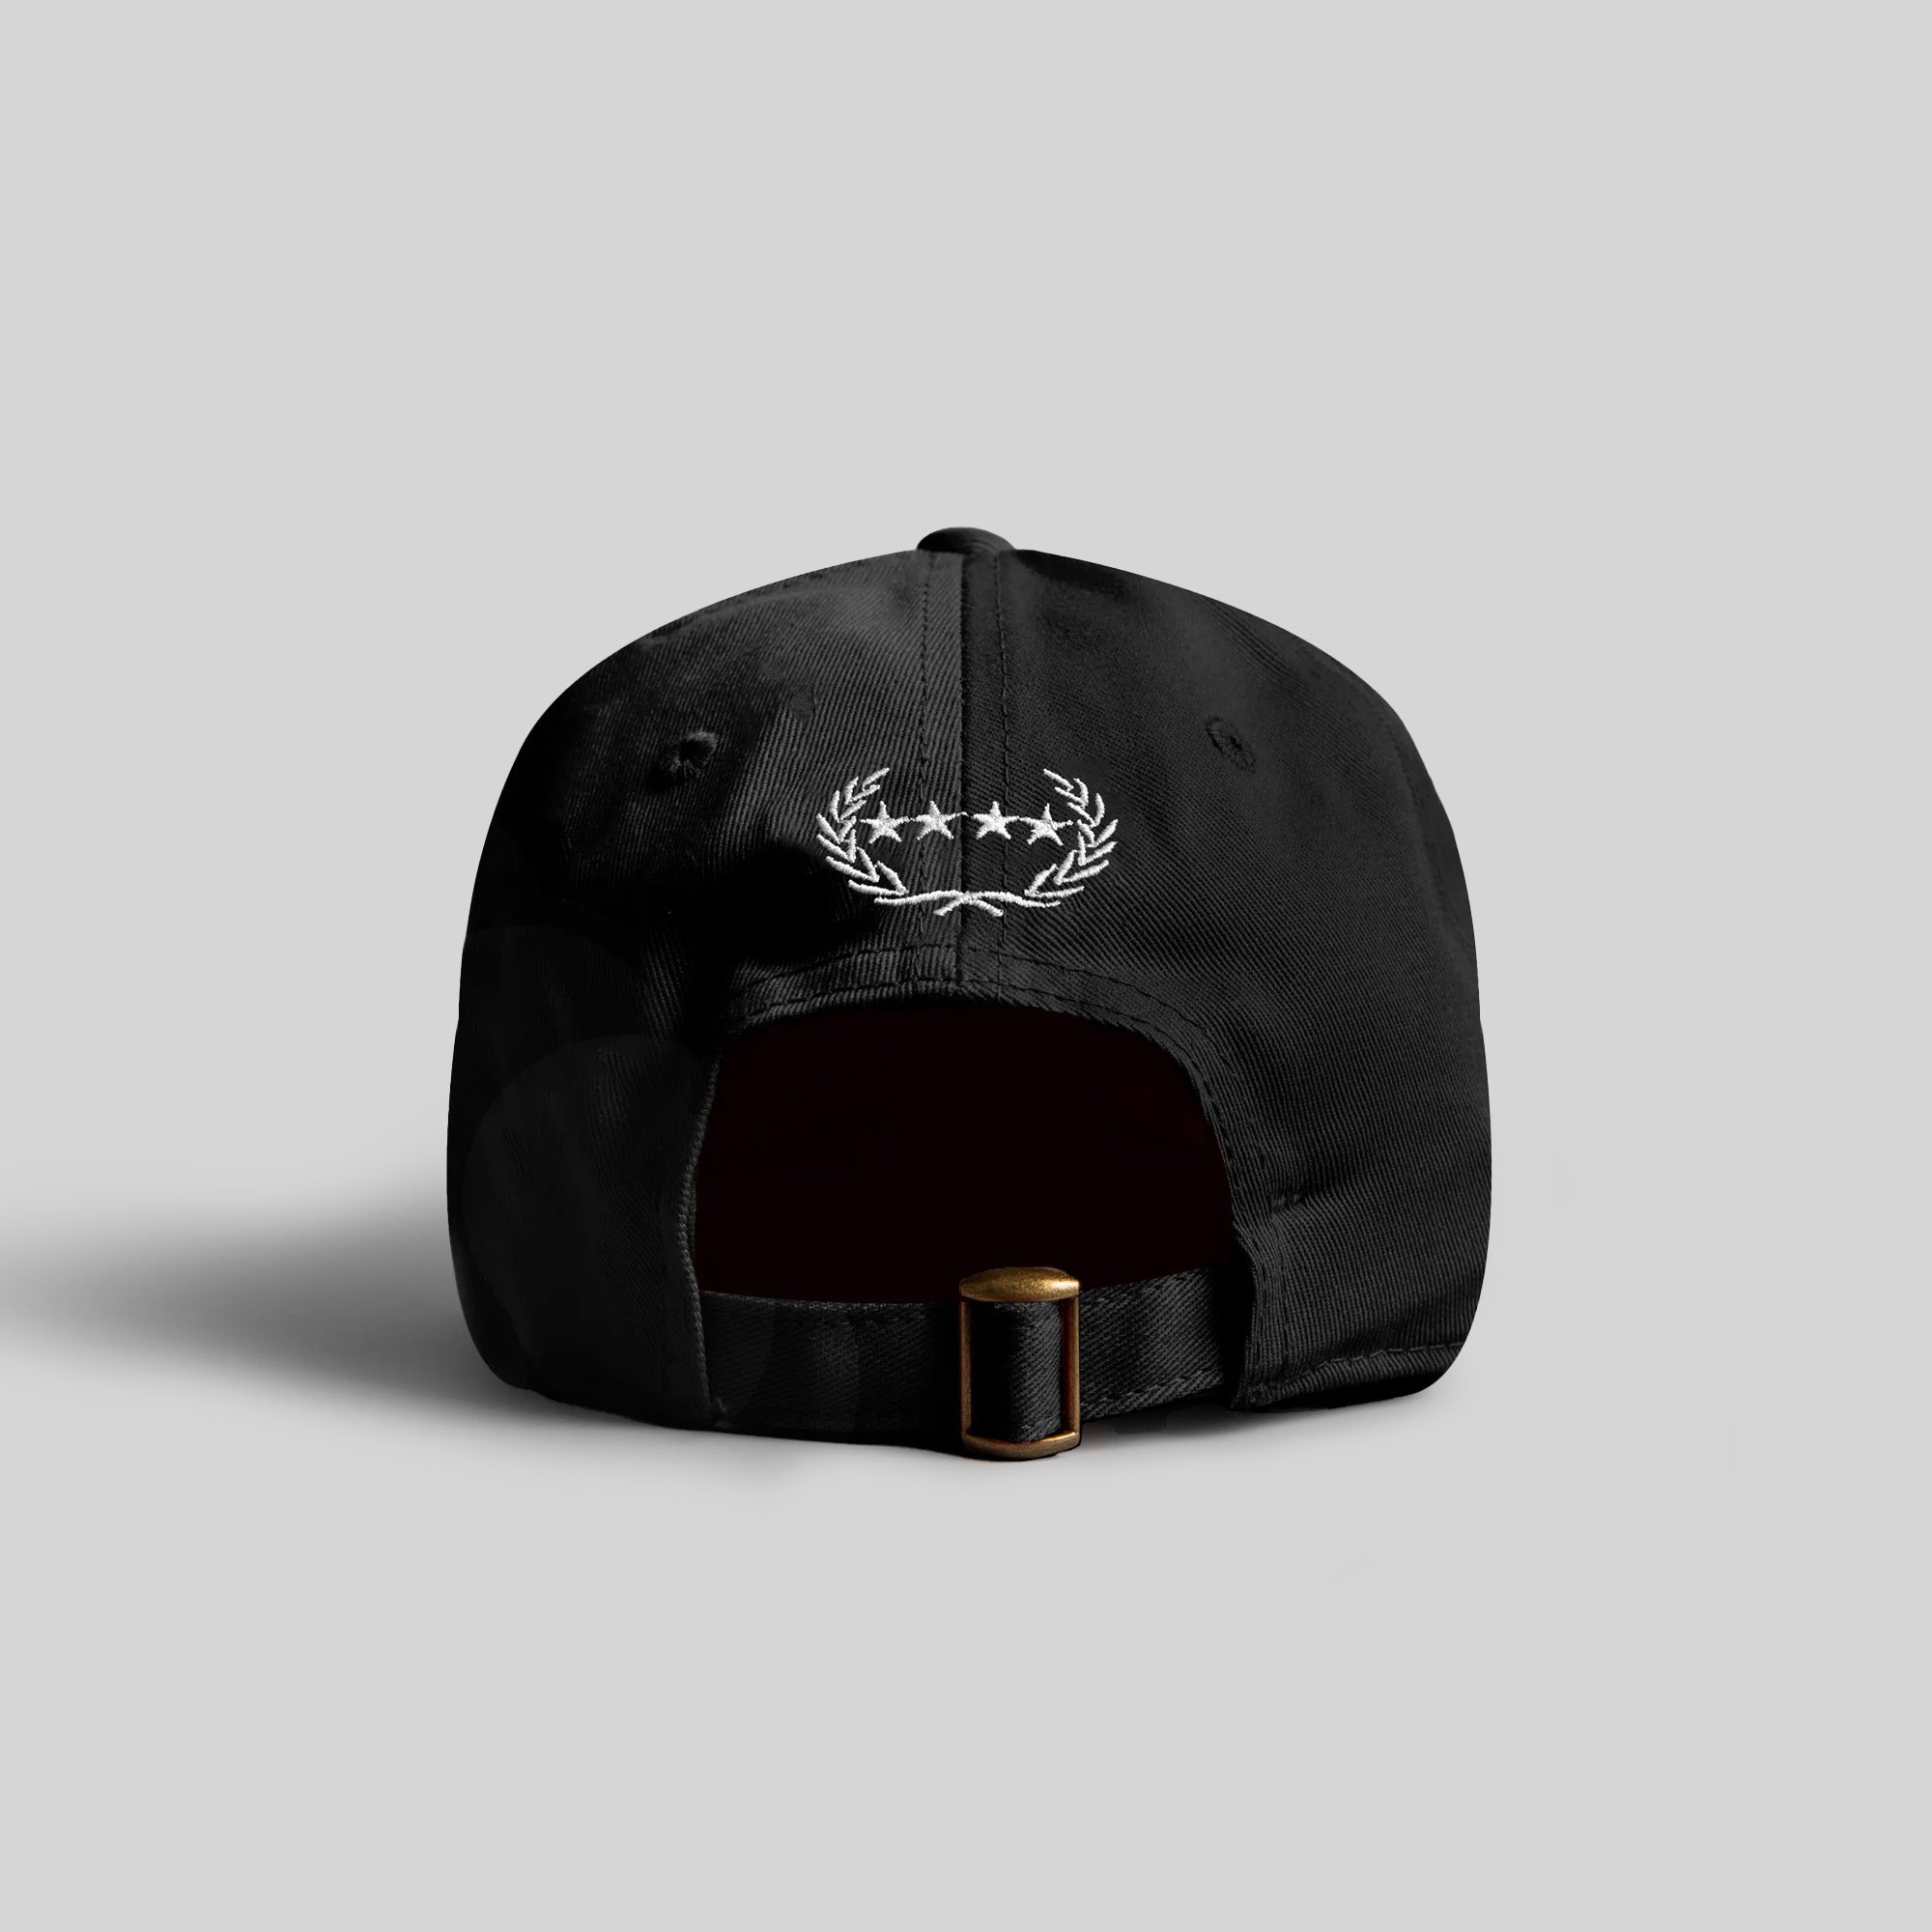 NOBODY ASKED YOU BLACK RELAXED FIT HAT